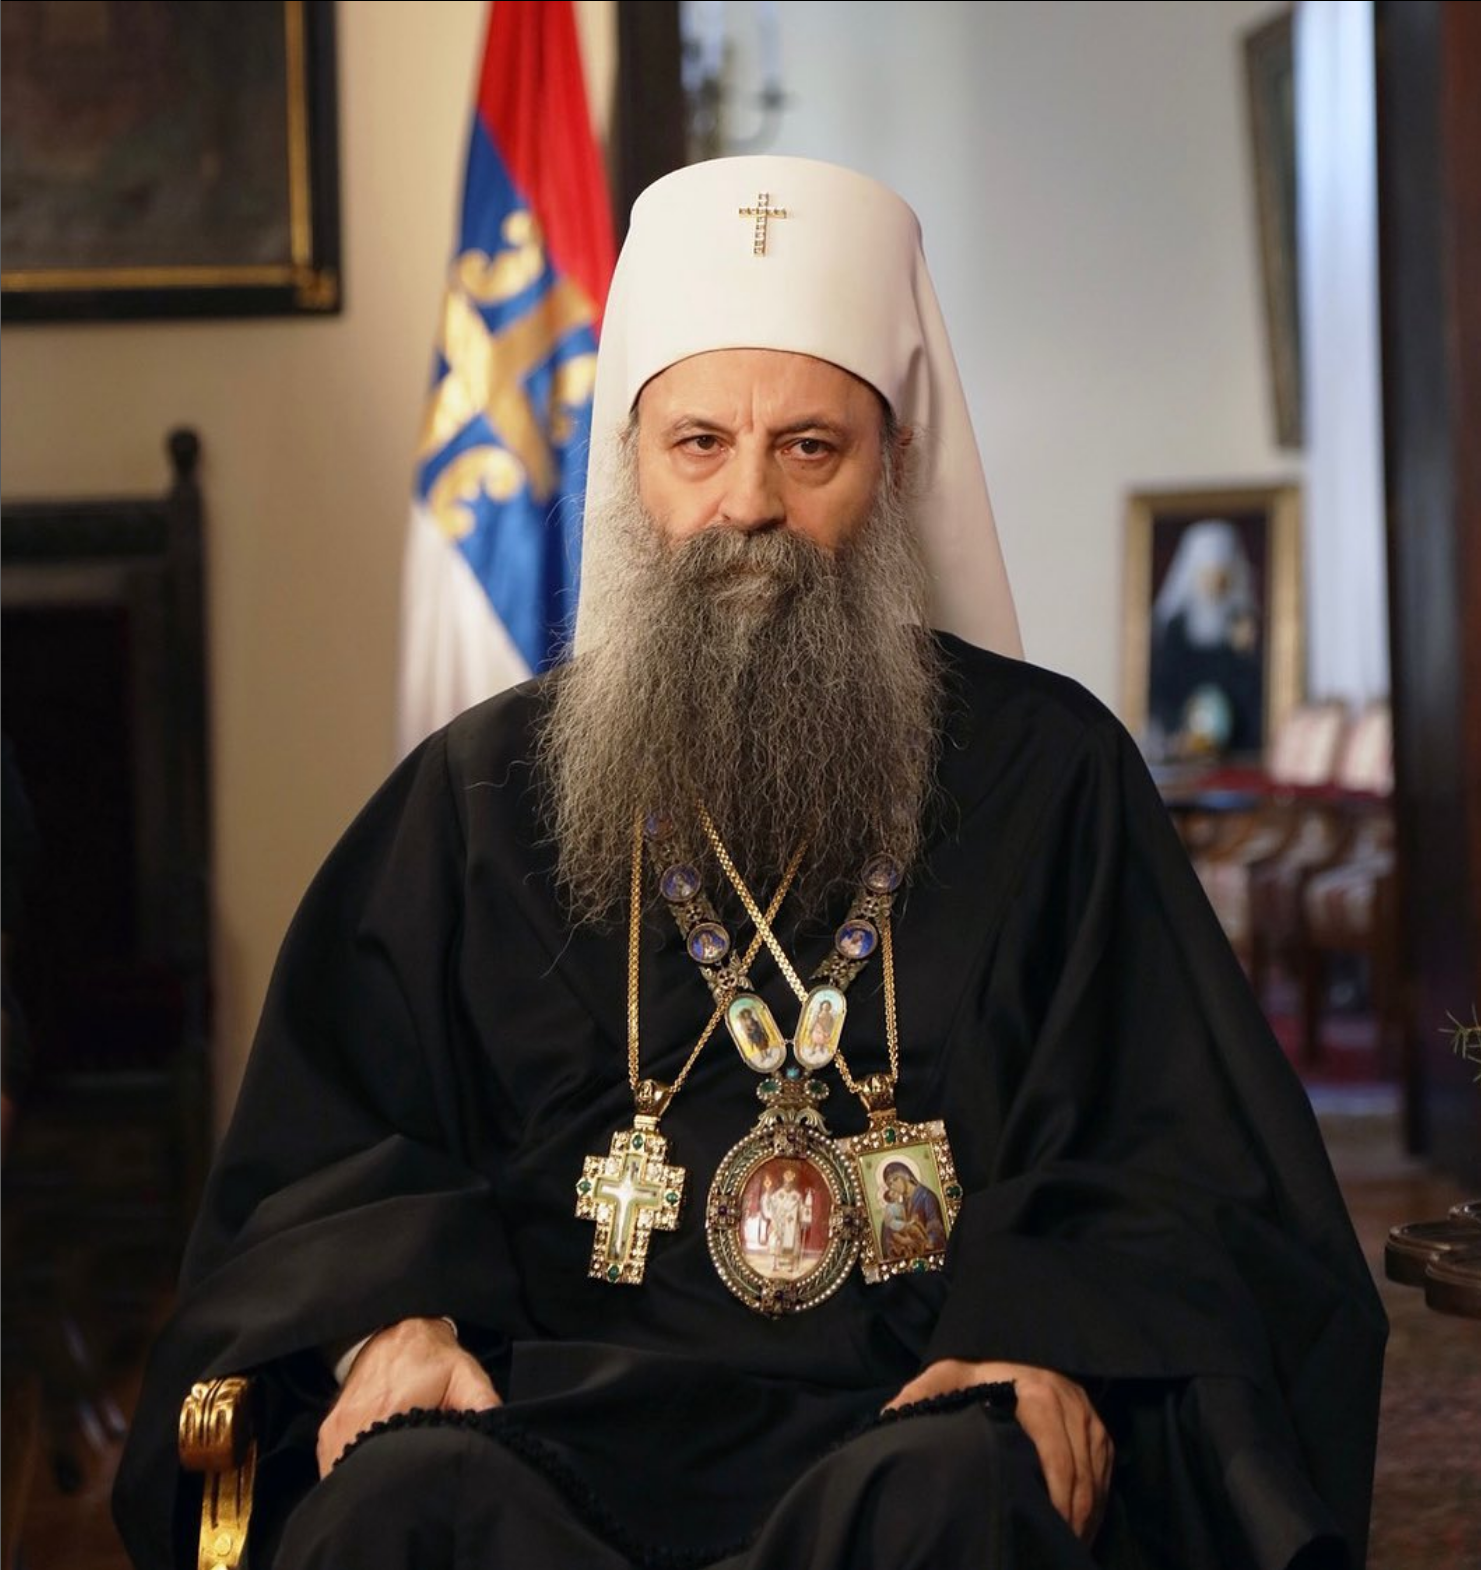 Situation In Kosovo Worsens As Prishtina Refuses Serbian Patriarch Entry - Serbian Forces Placed On Highest Alert